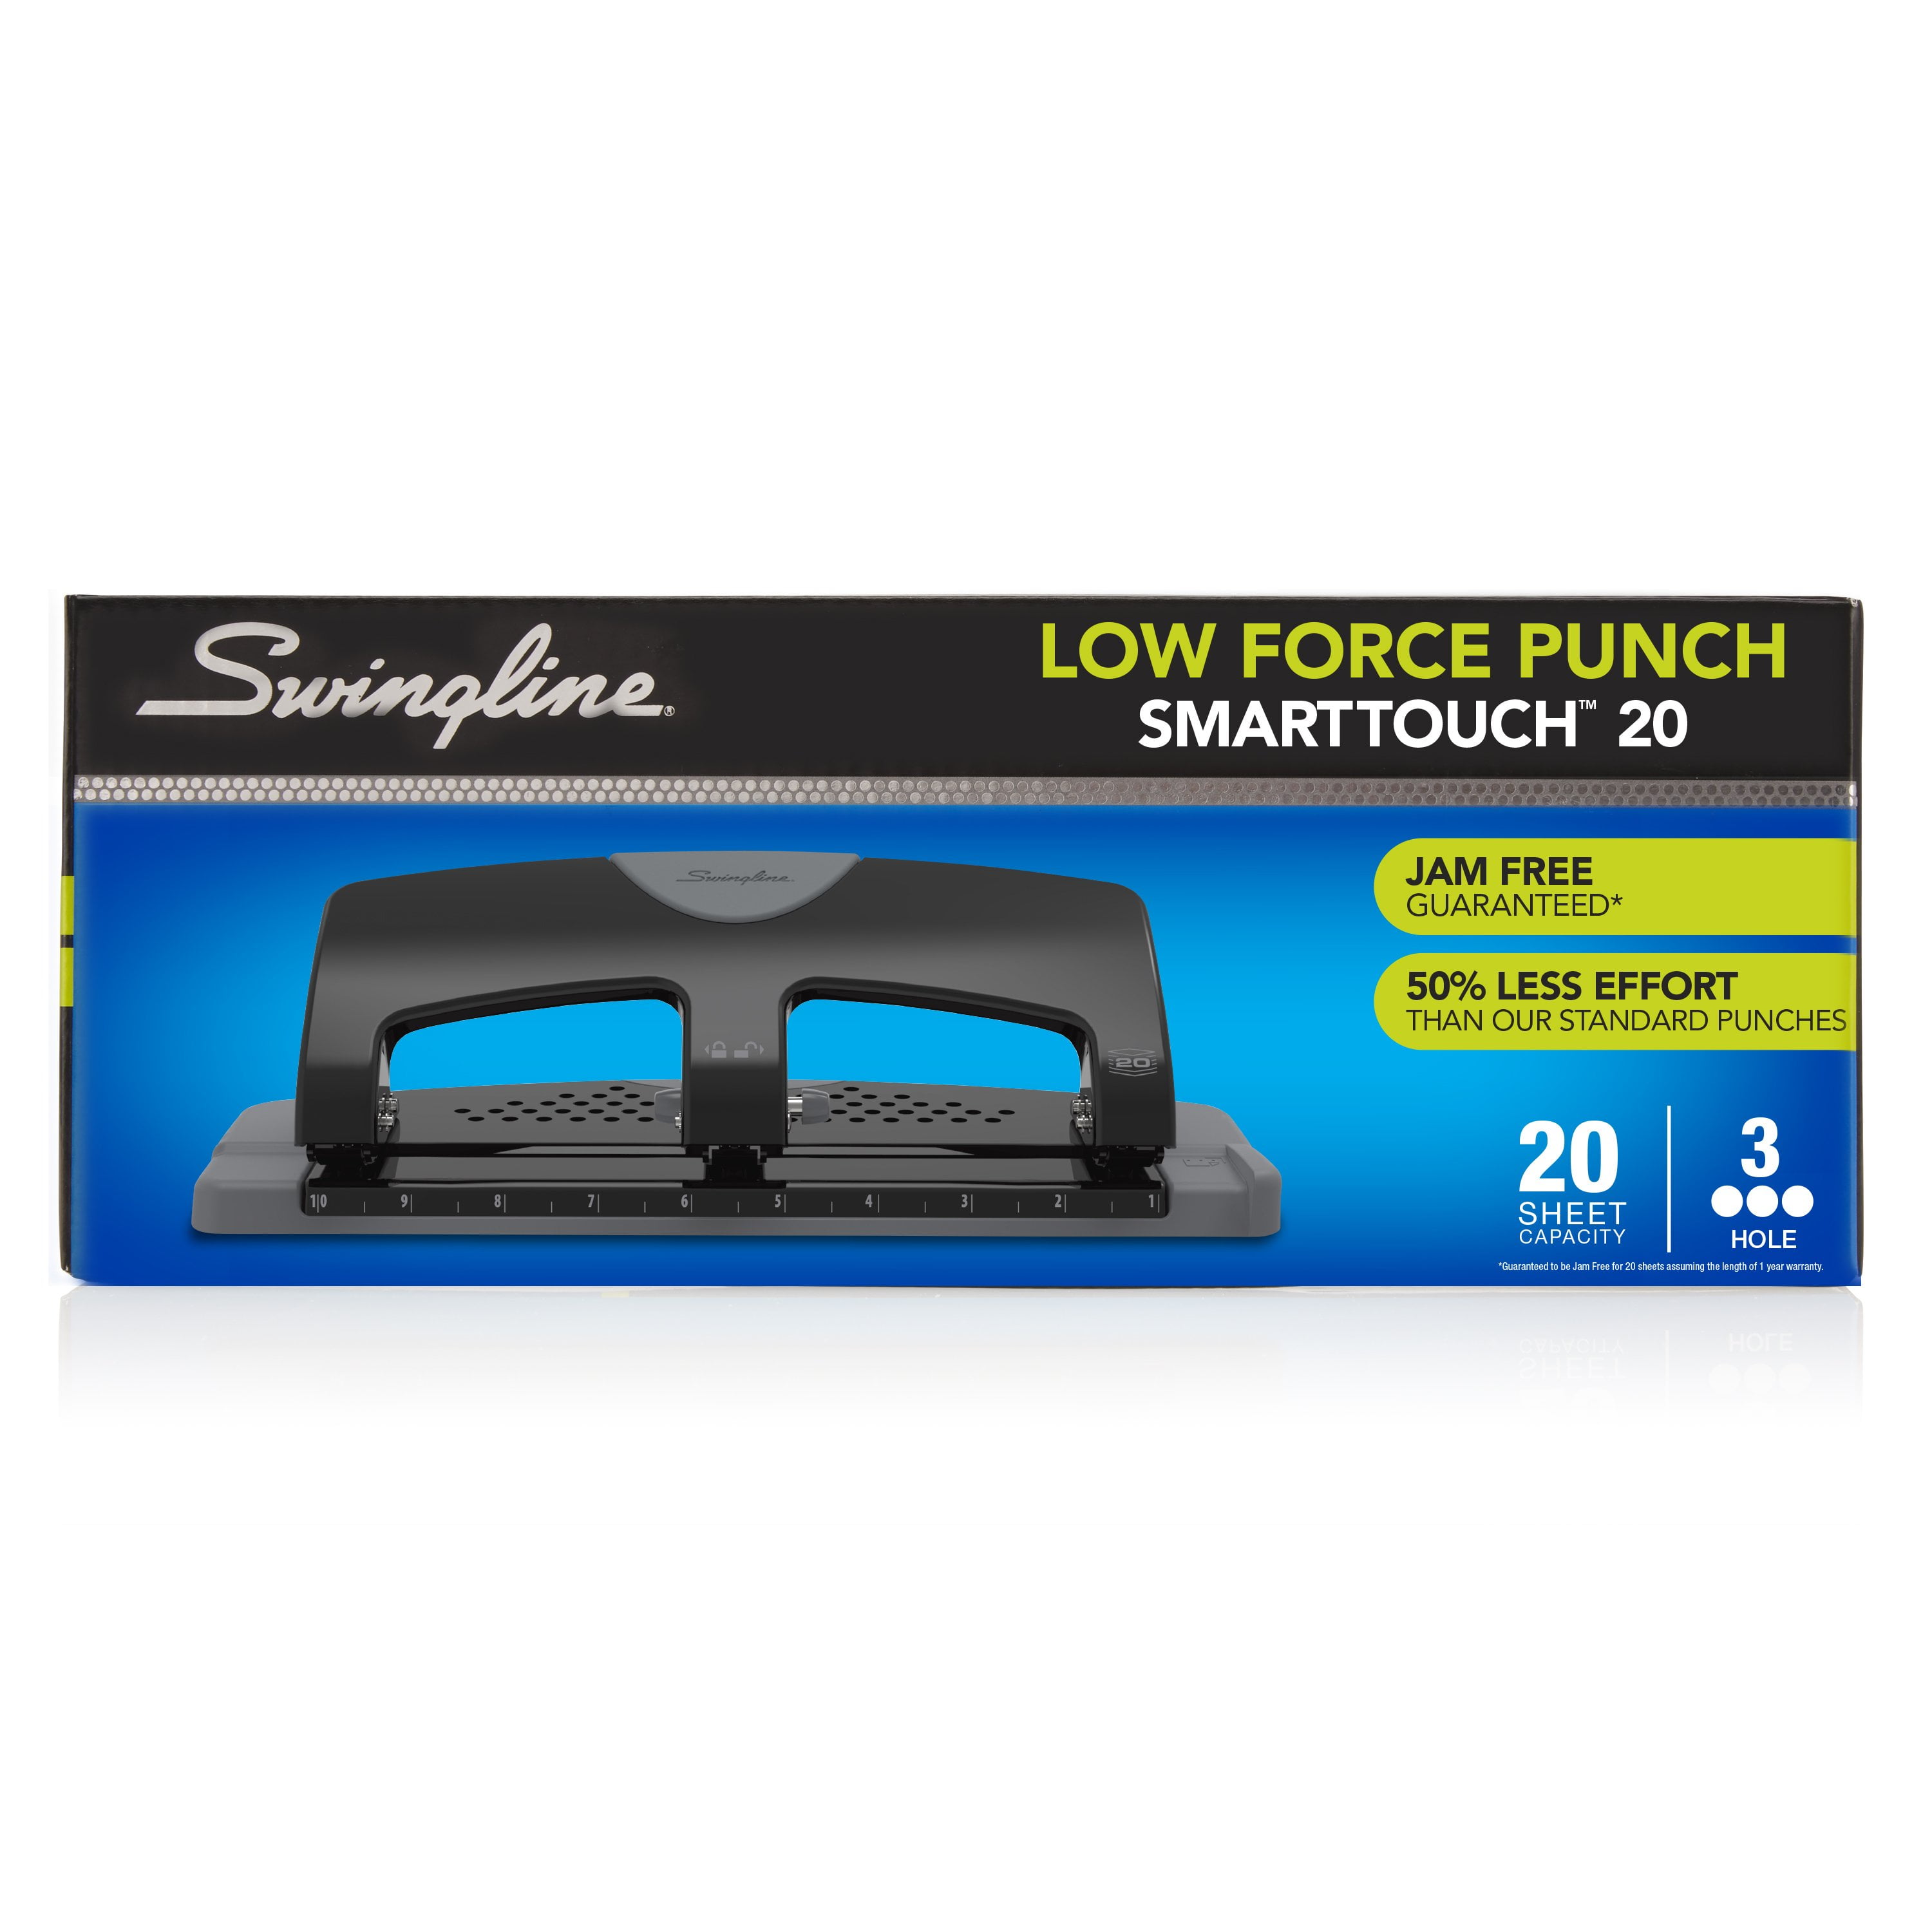 Swingline 3 Hole Punch, Hole Puncher, 12 Sheet Punch Capacity, Low Force,  SmartTouch, Black/Gray (74134) •